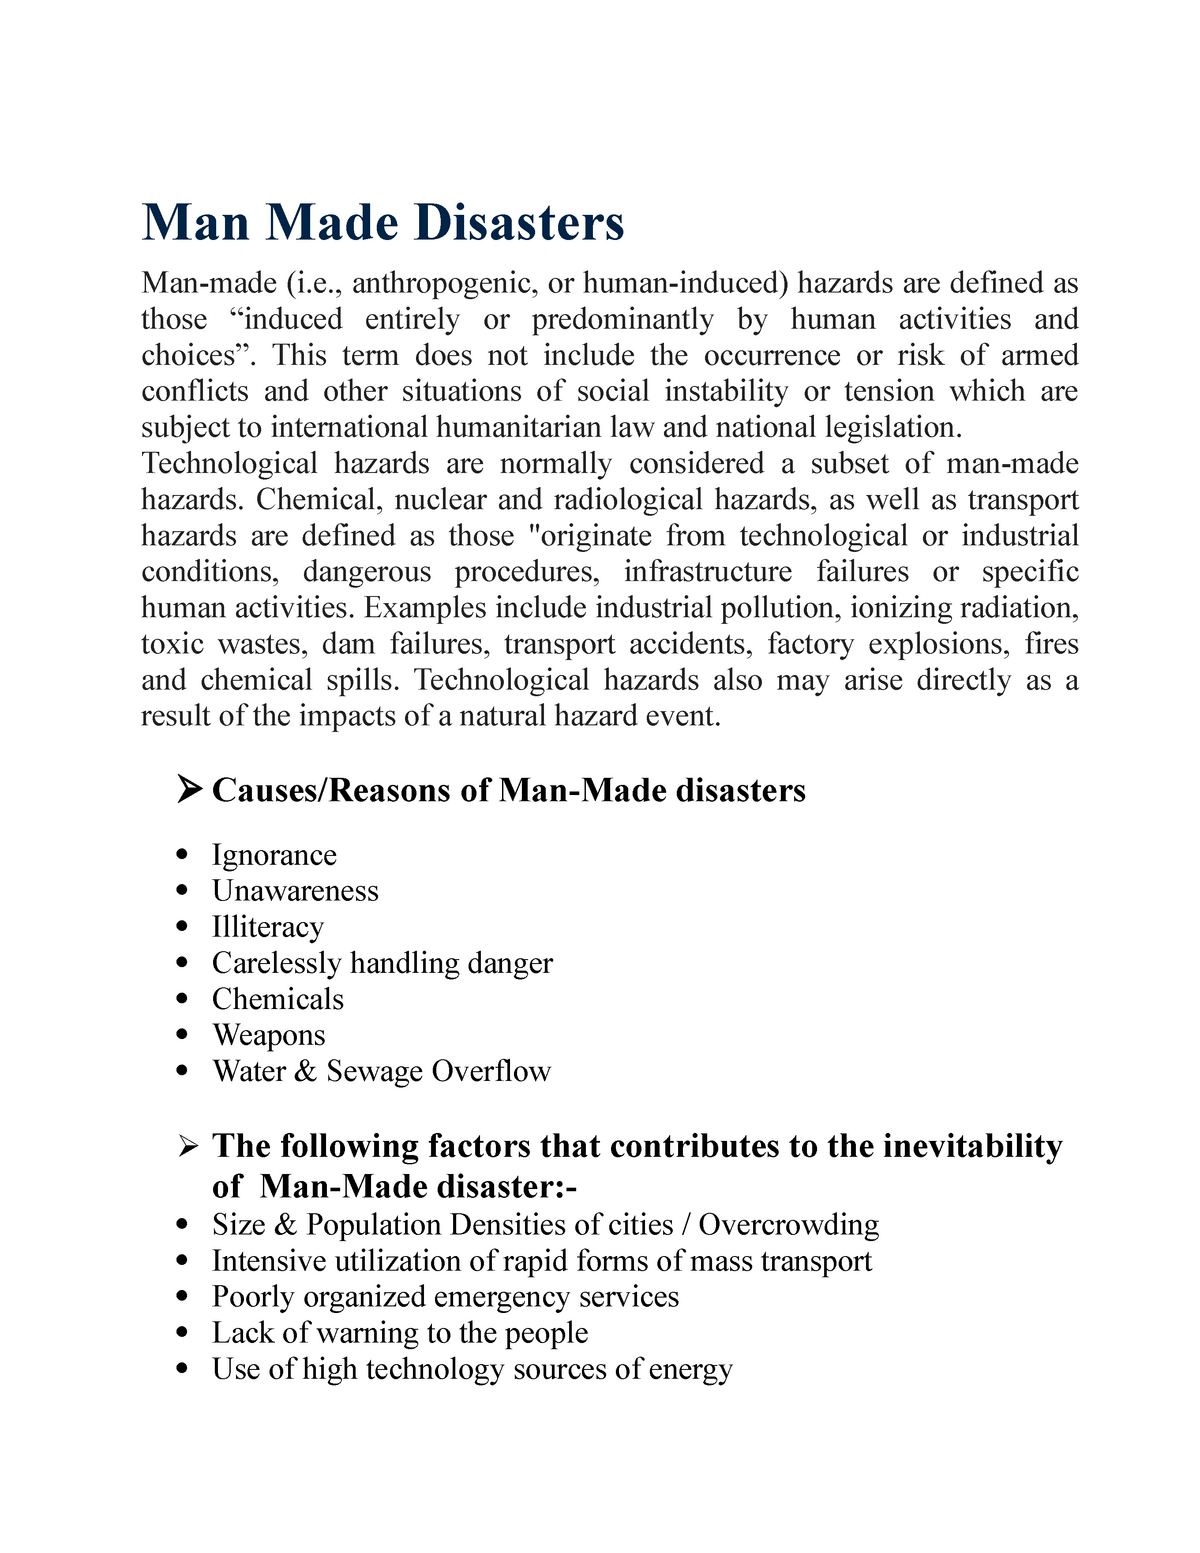 essay on man made disasters wikipedia